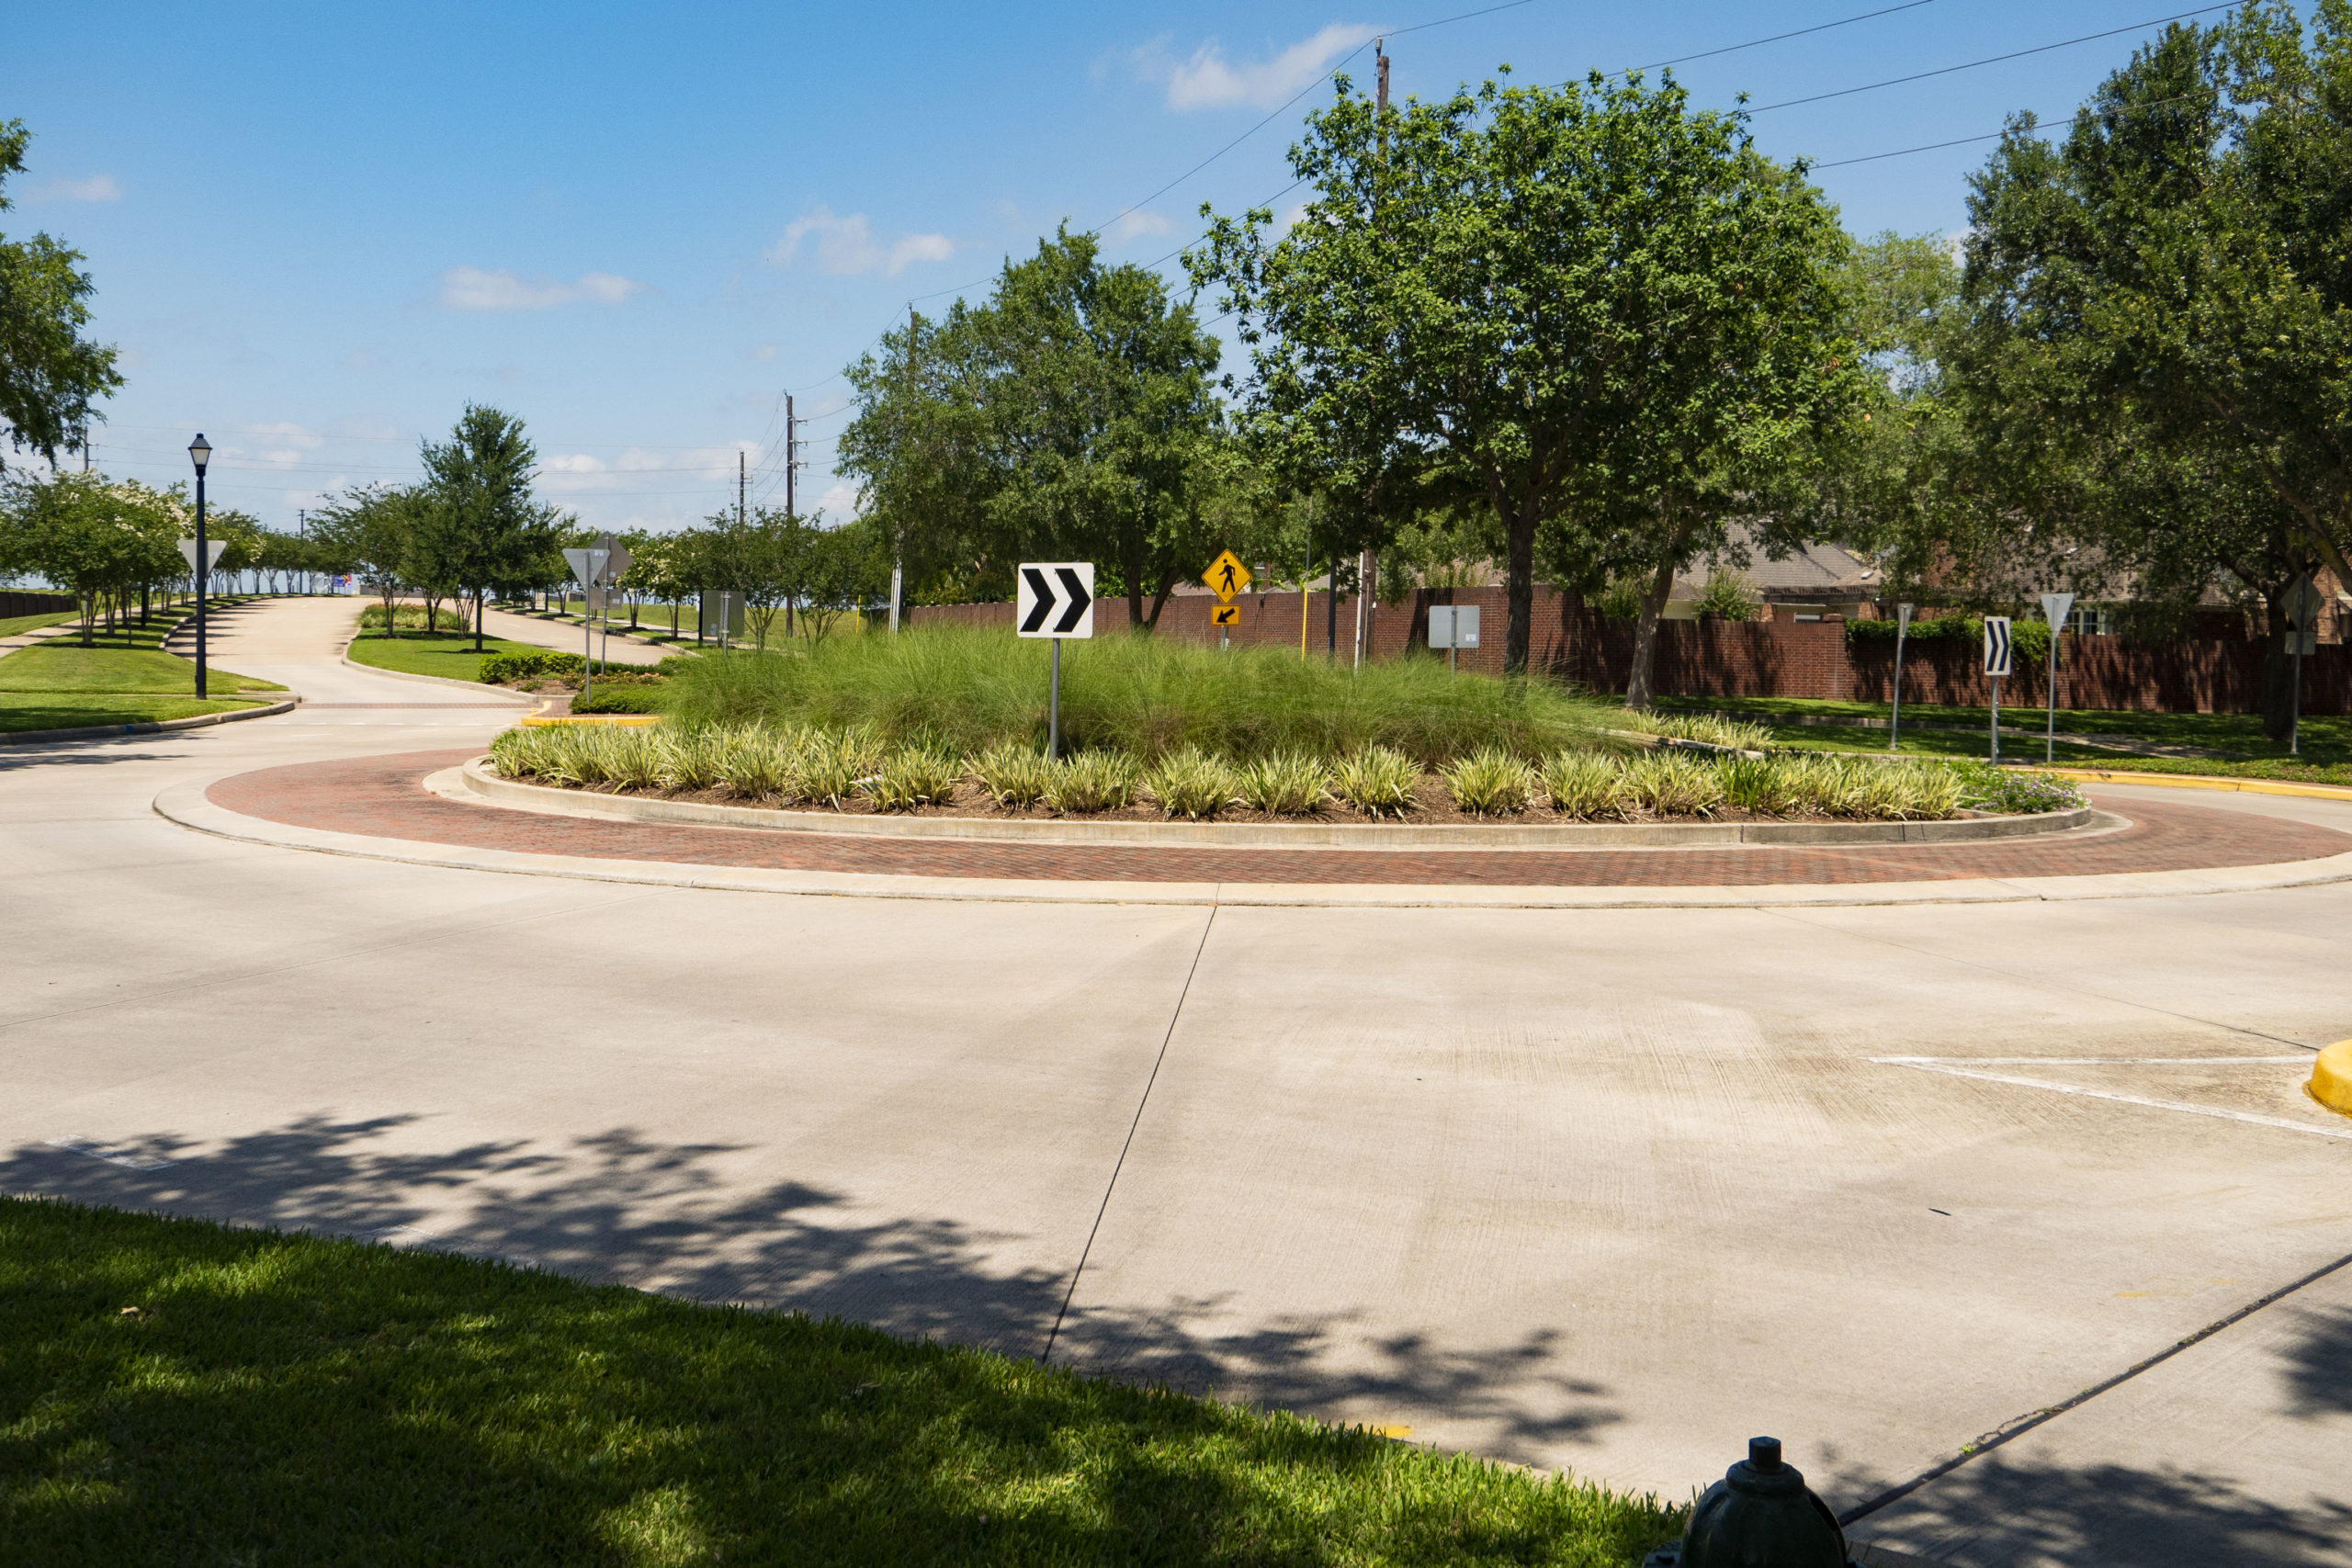 Roundabout with landscaping